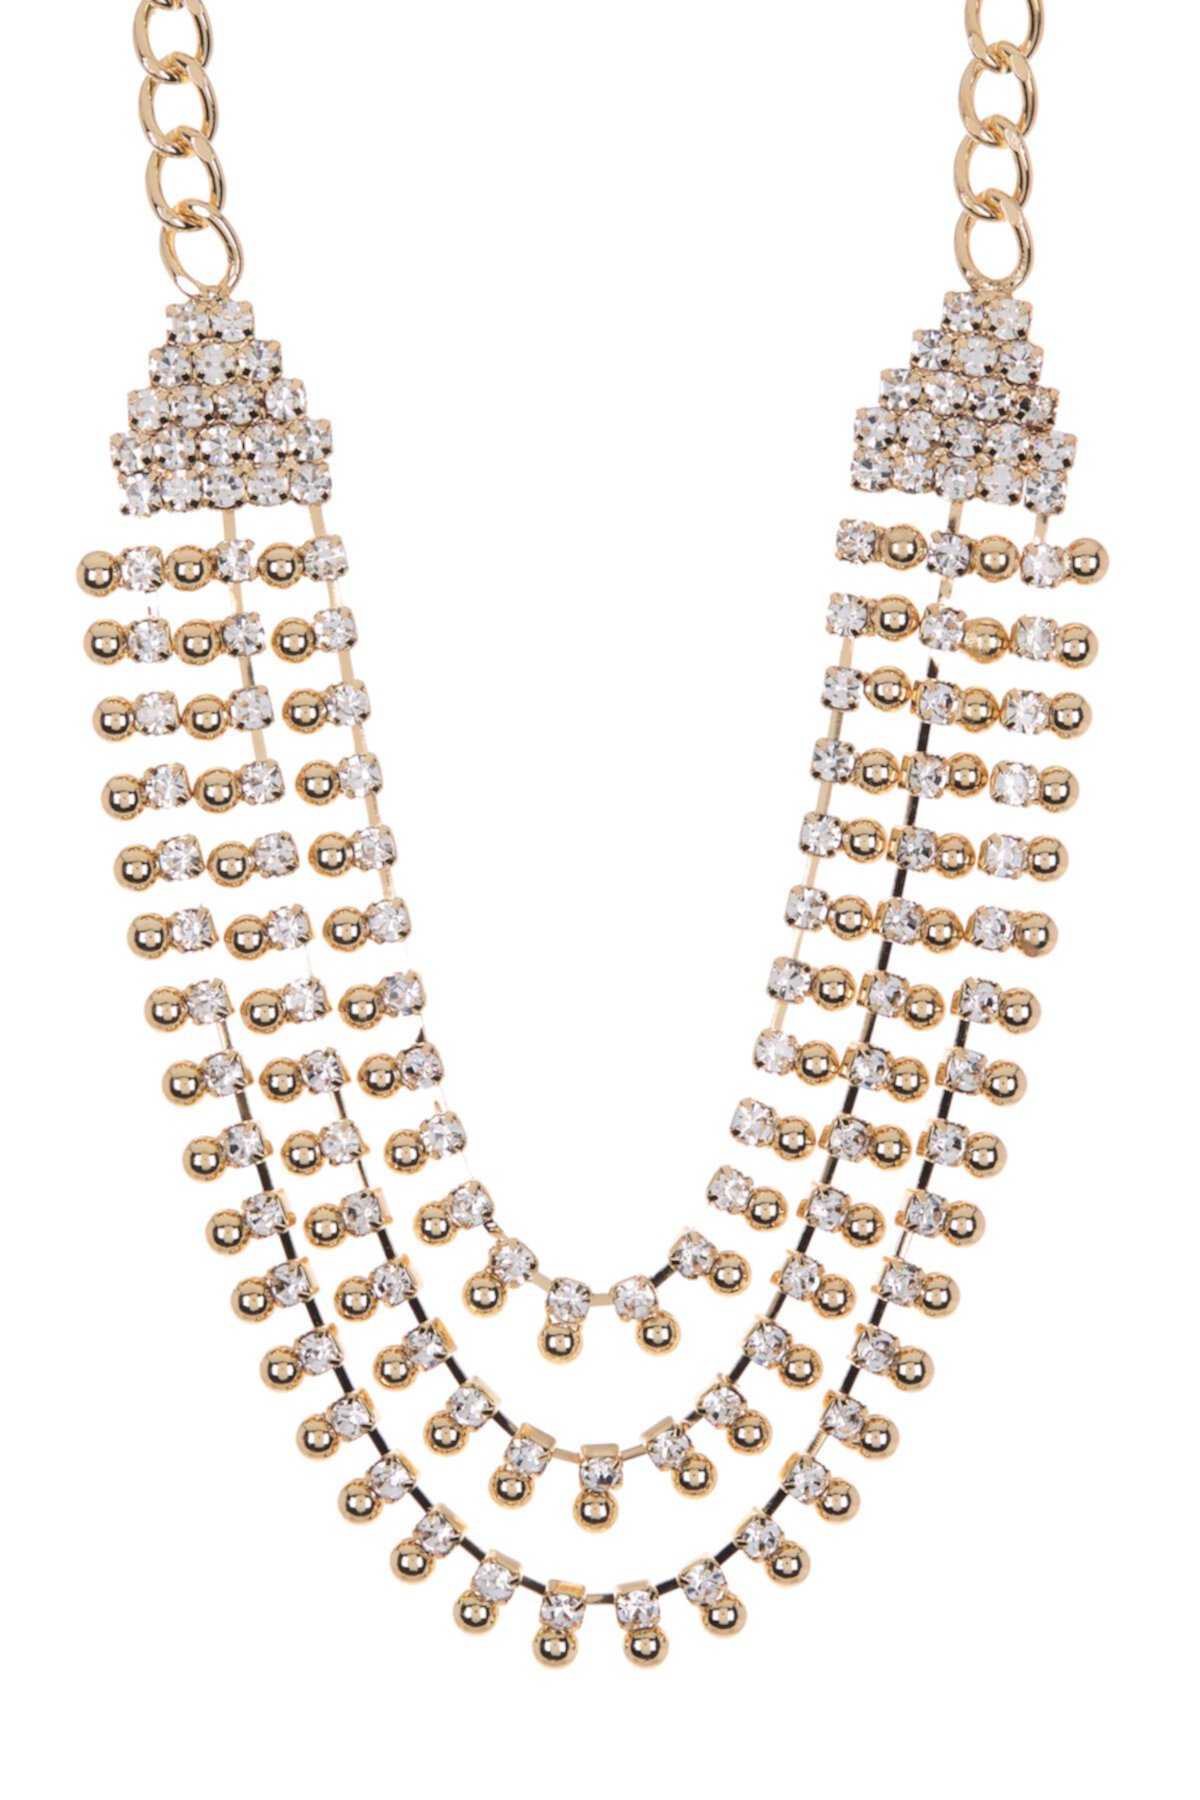 Gold Plated 3 Row Crystal Collar Necklace Free Press